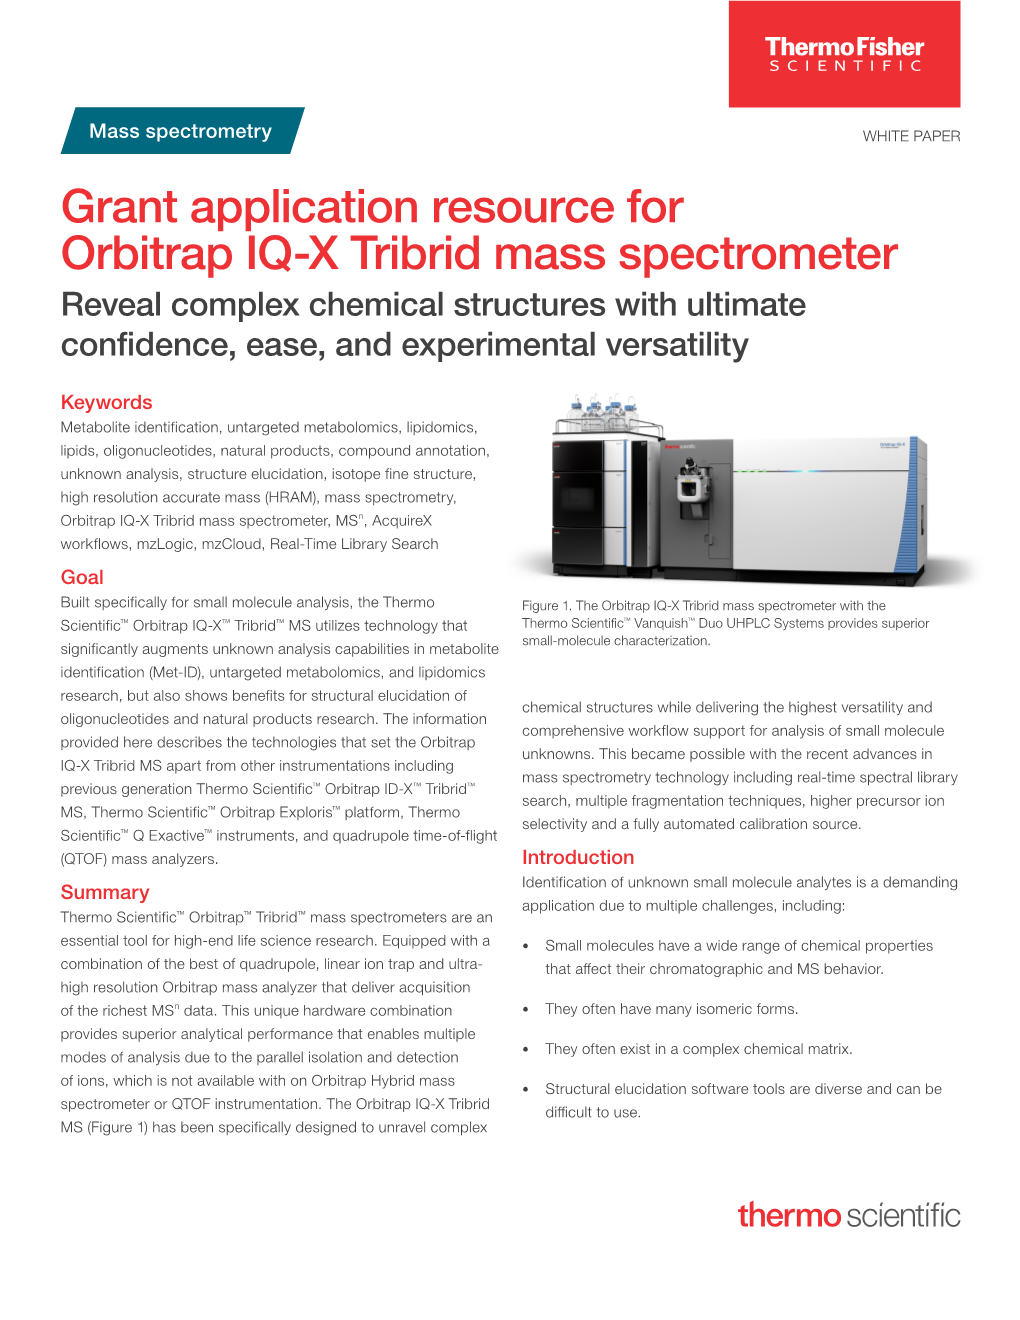 Grant Application Resource for Orbitrap IQ-X Tribrid Mass Spectrometer Reveal Complex Chemical Structures with Ultimate Confidence, Ease, and Experimental Versatility